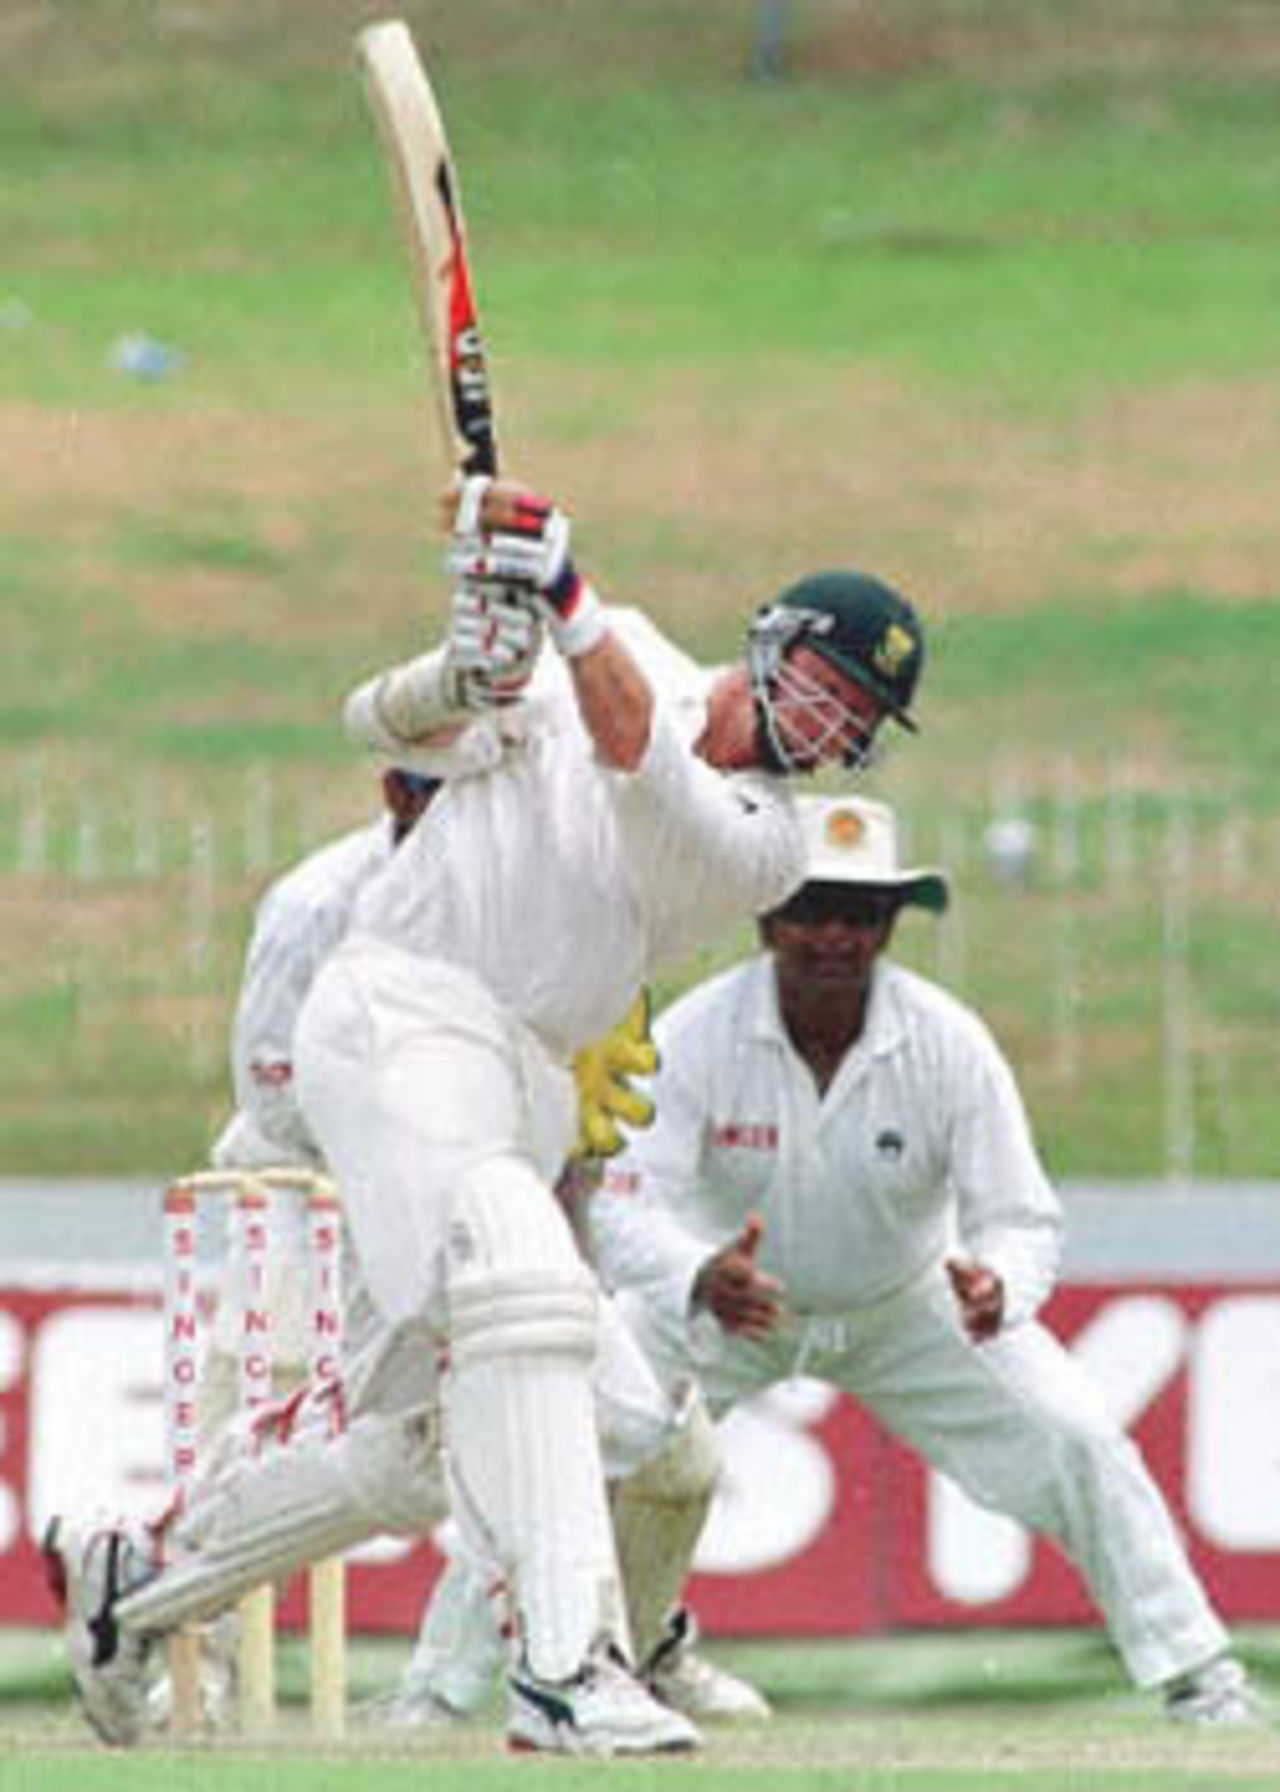 South African batsman Lance Klusener plays a stroke in the third and final Test against Sri Lanka. Klusener made an unbeaten 95 in the first innings. South Africa in Sri Lanka, 2000/01, 3rd Test, Sri Lanka v South Africa, Sinhalese Sports Club Ground, Colombo, 06-10 August 2000 (Day 2).